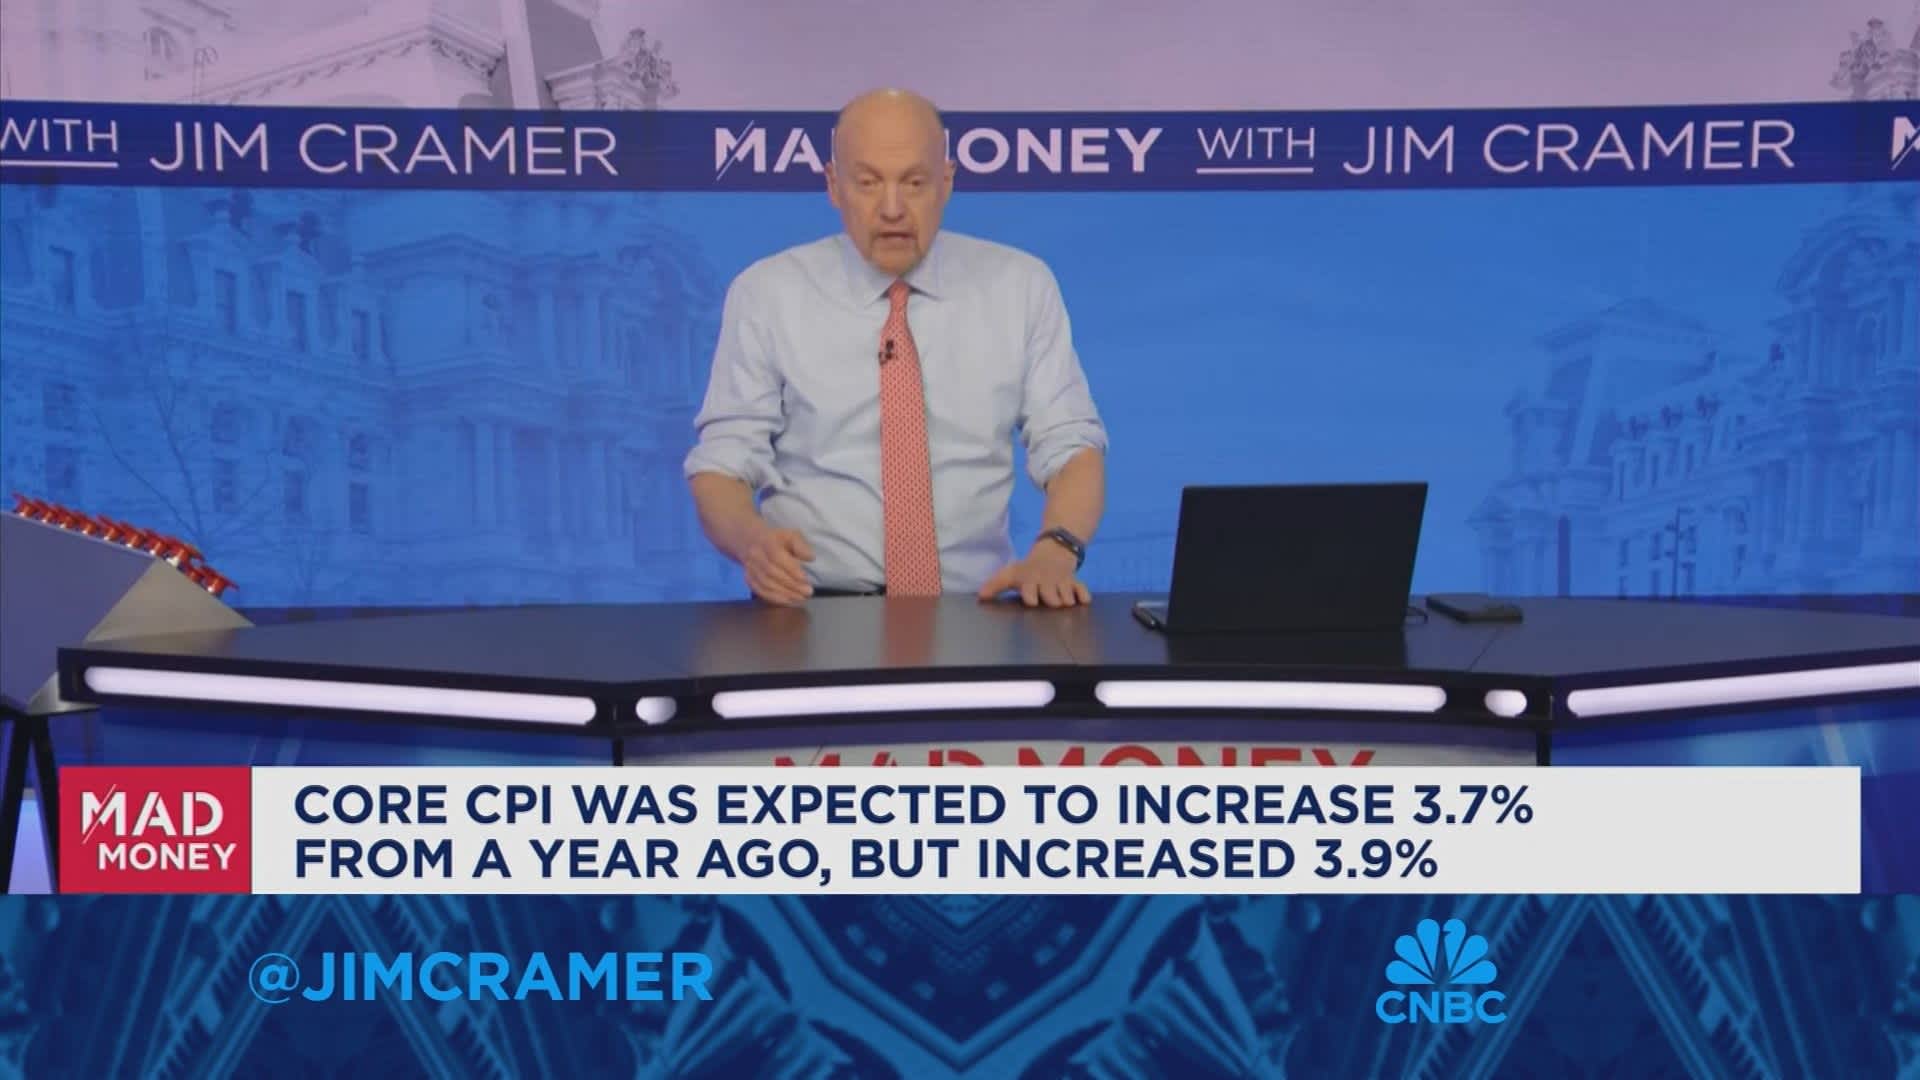 'Things got way too frothy' in the market, says Jim Cramer